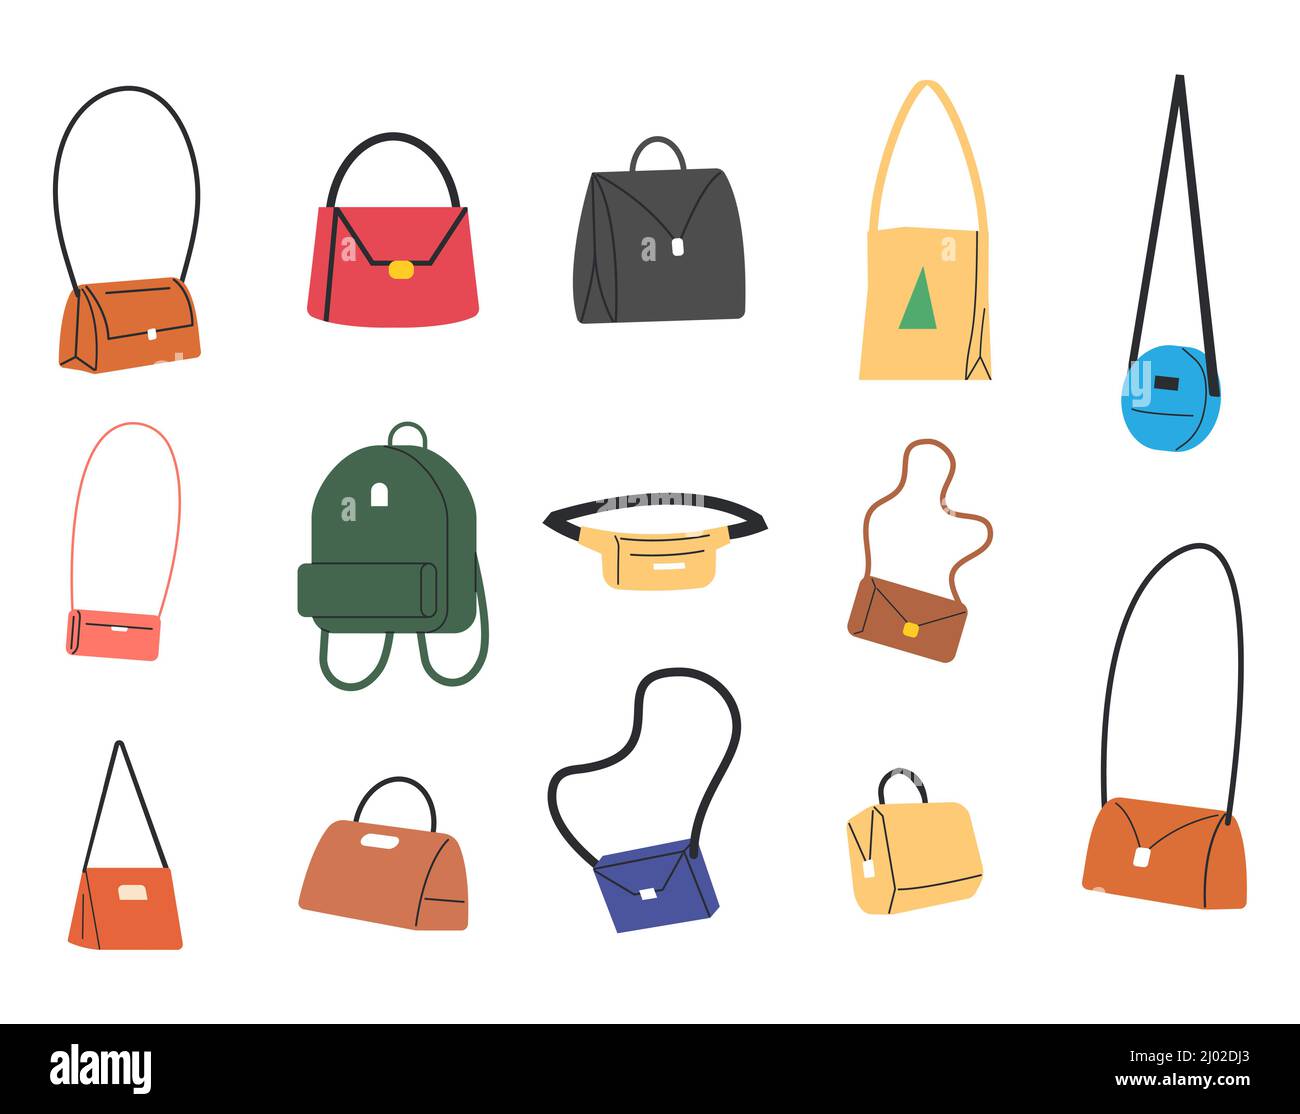 Retro leather bag design. Watercolor hand painted postman bag illustration  isolated on white. School bag concept clipart. Vintage old -fashioned bag  Stock Photo - Alamy